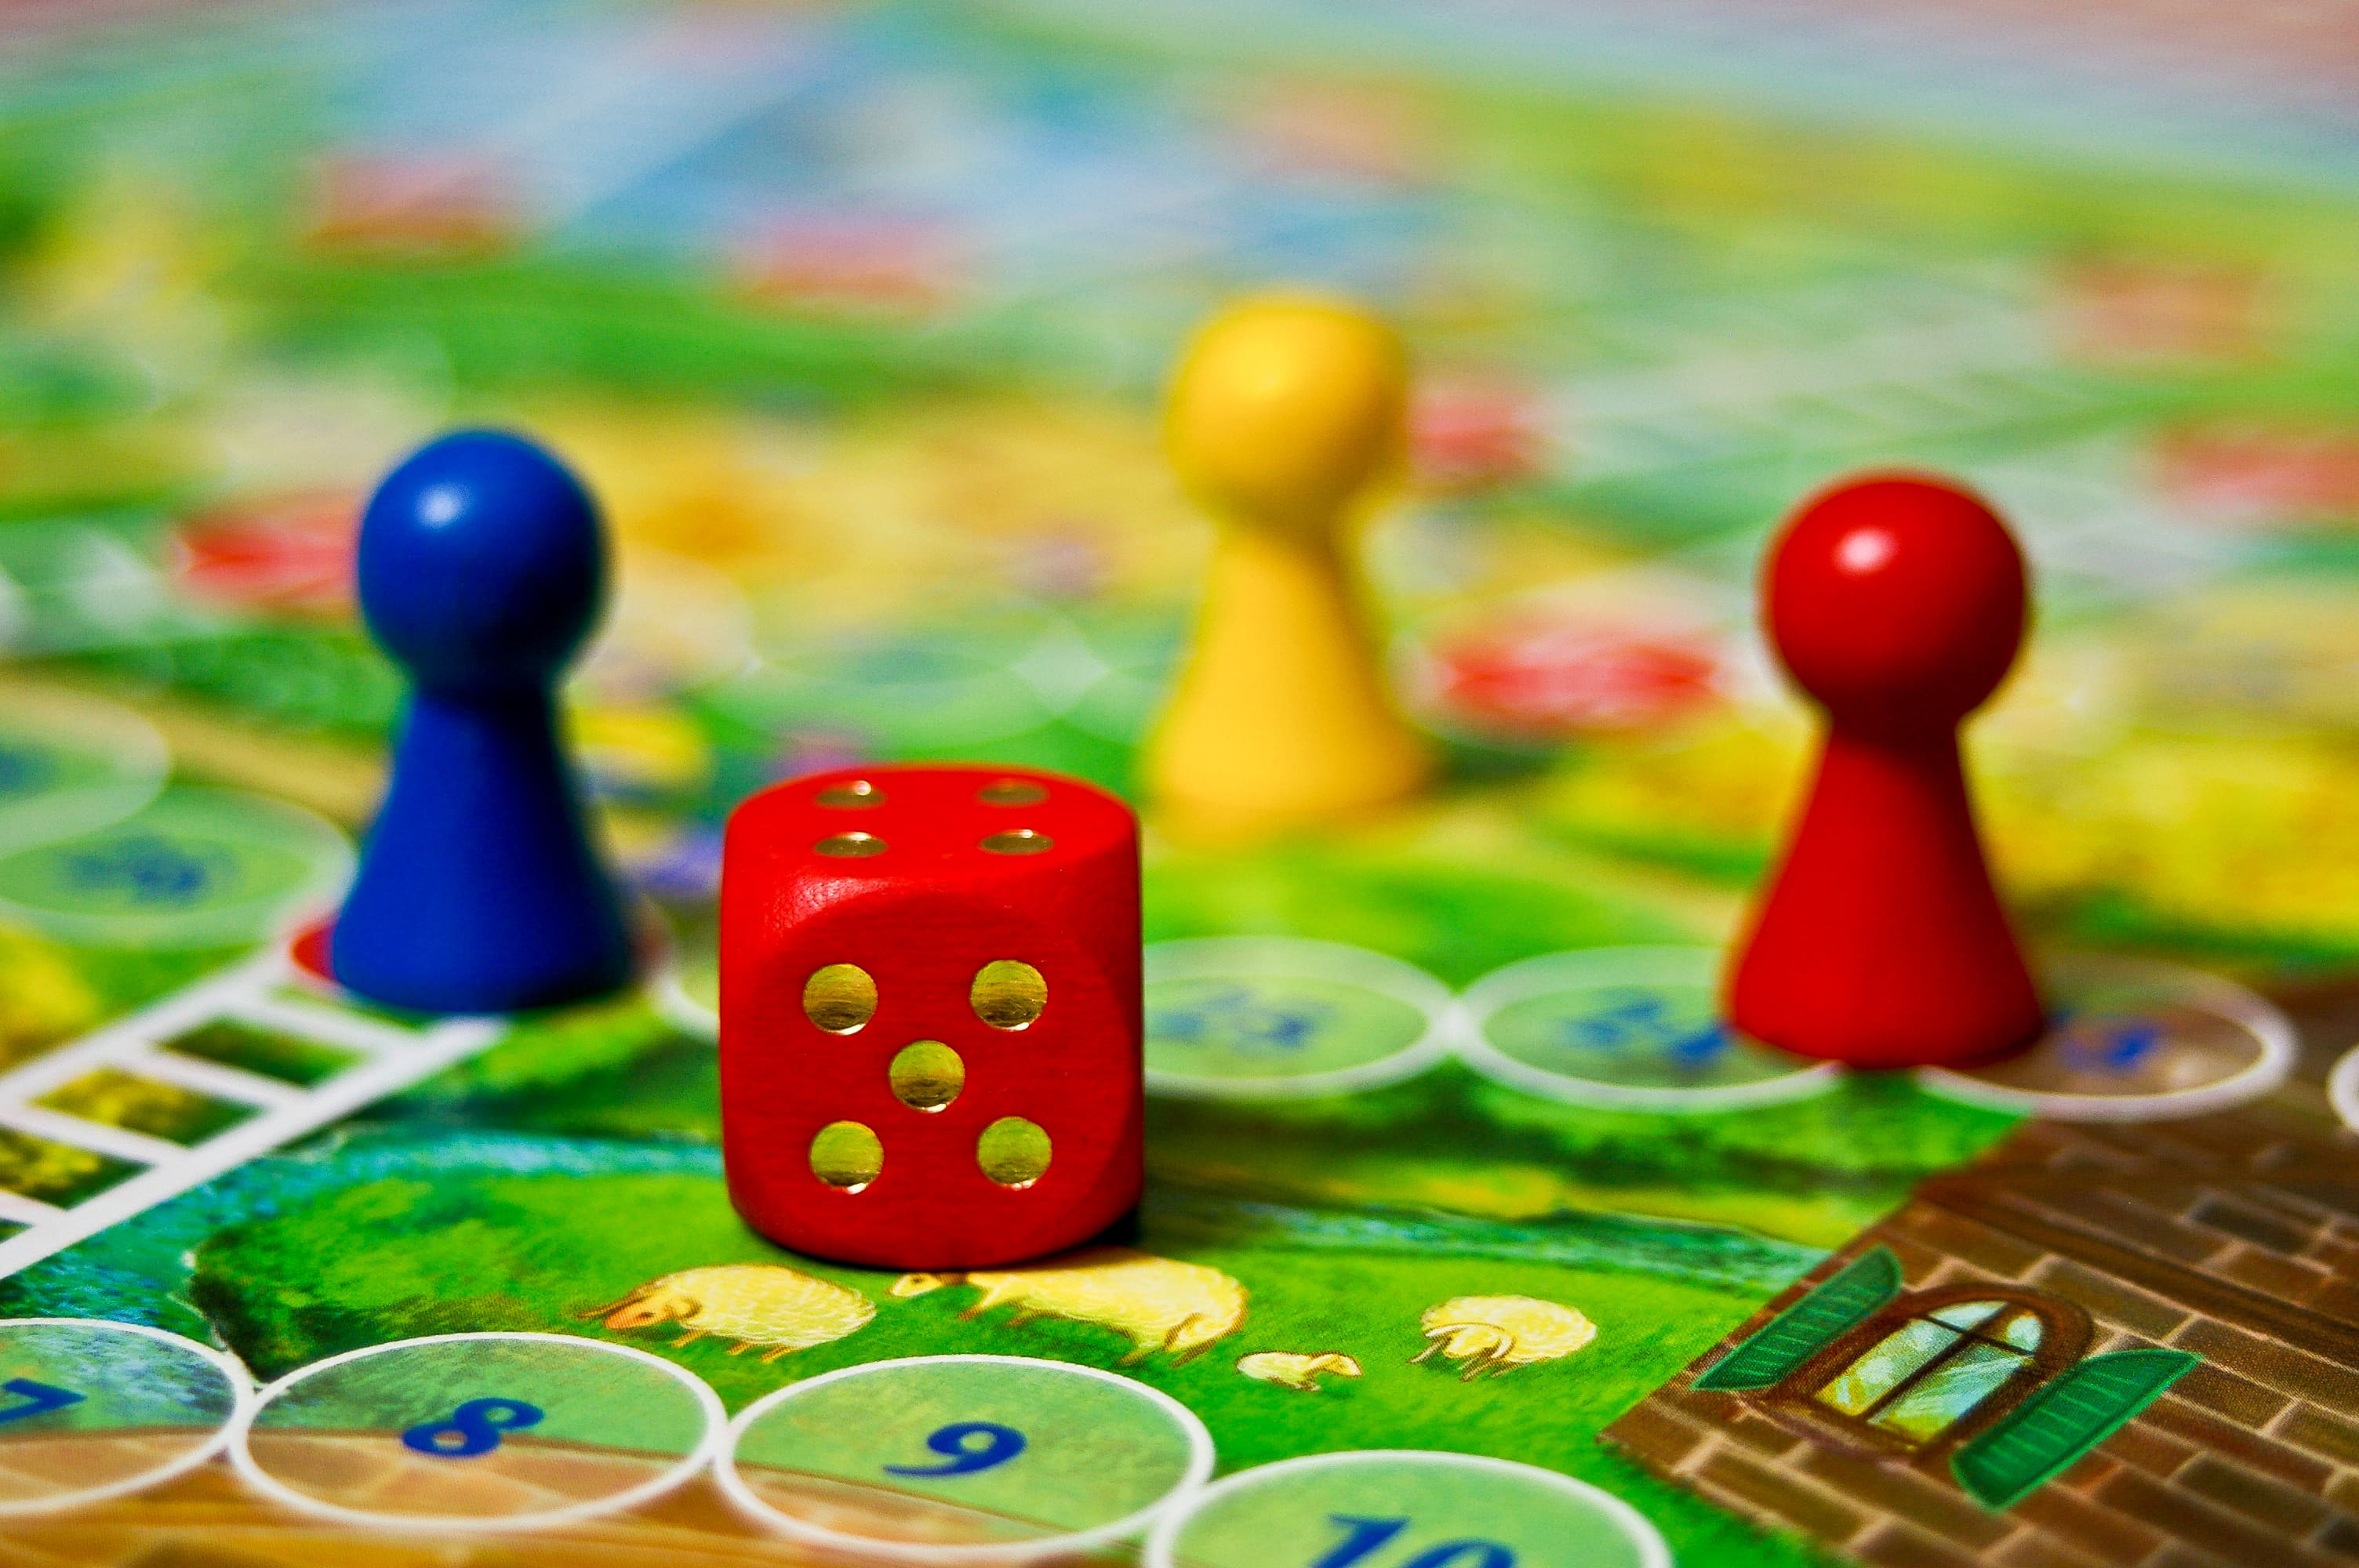  A red game die sits in the foreground of a colorful board game with blue, yellow, and red player pieces.